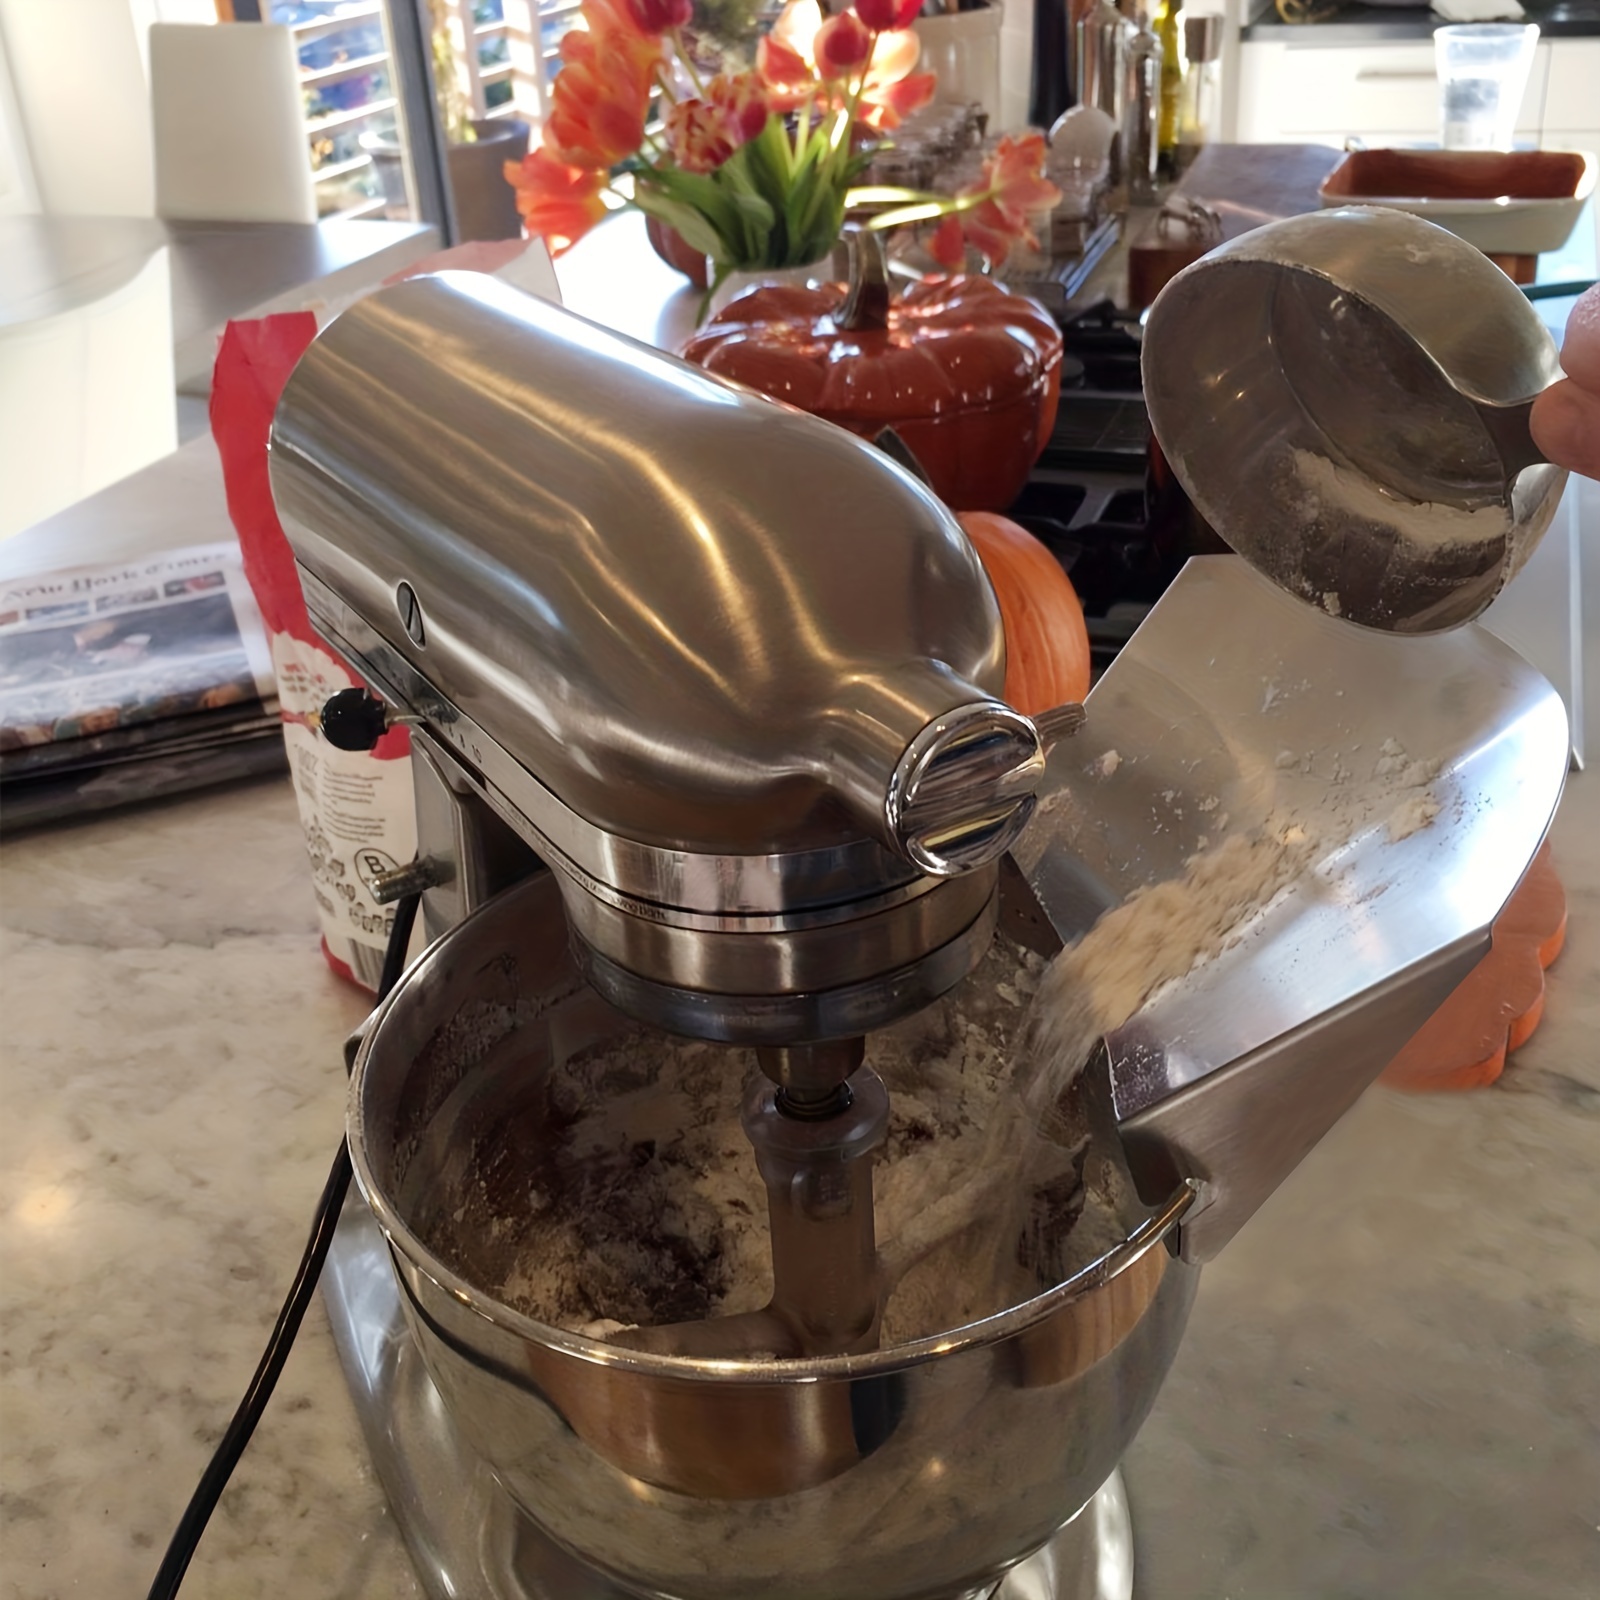 Pouring Shield, Universal Pouring Chute for Kitchen Aid Bowl-Lift